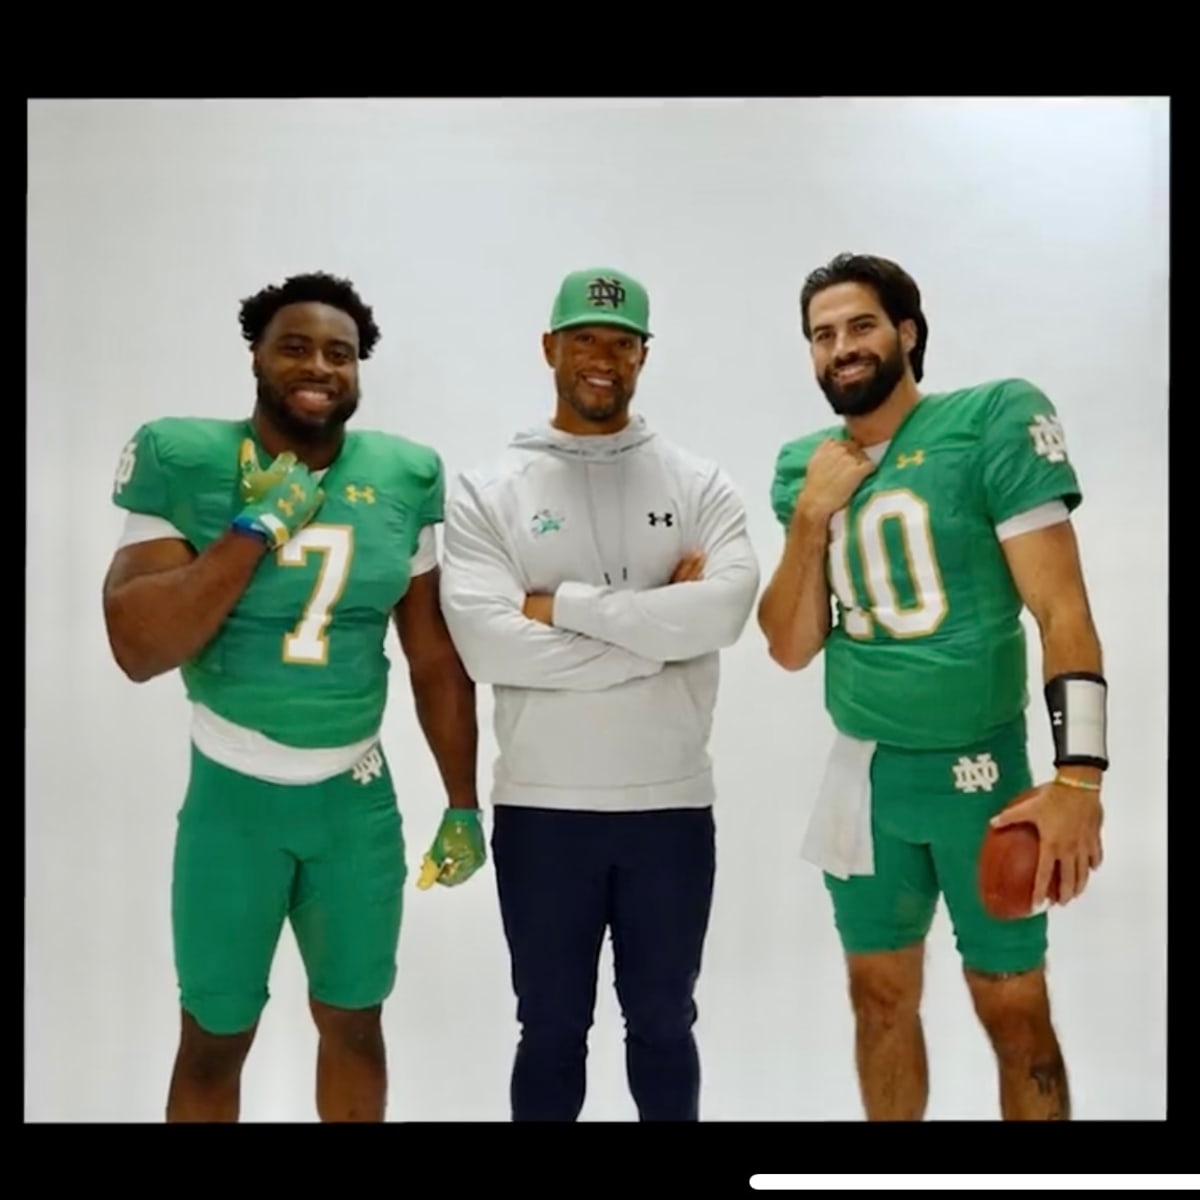 Notre Dame football reveals names on green jerseys for Cal game